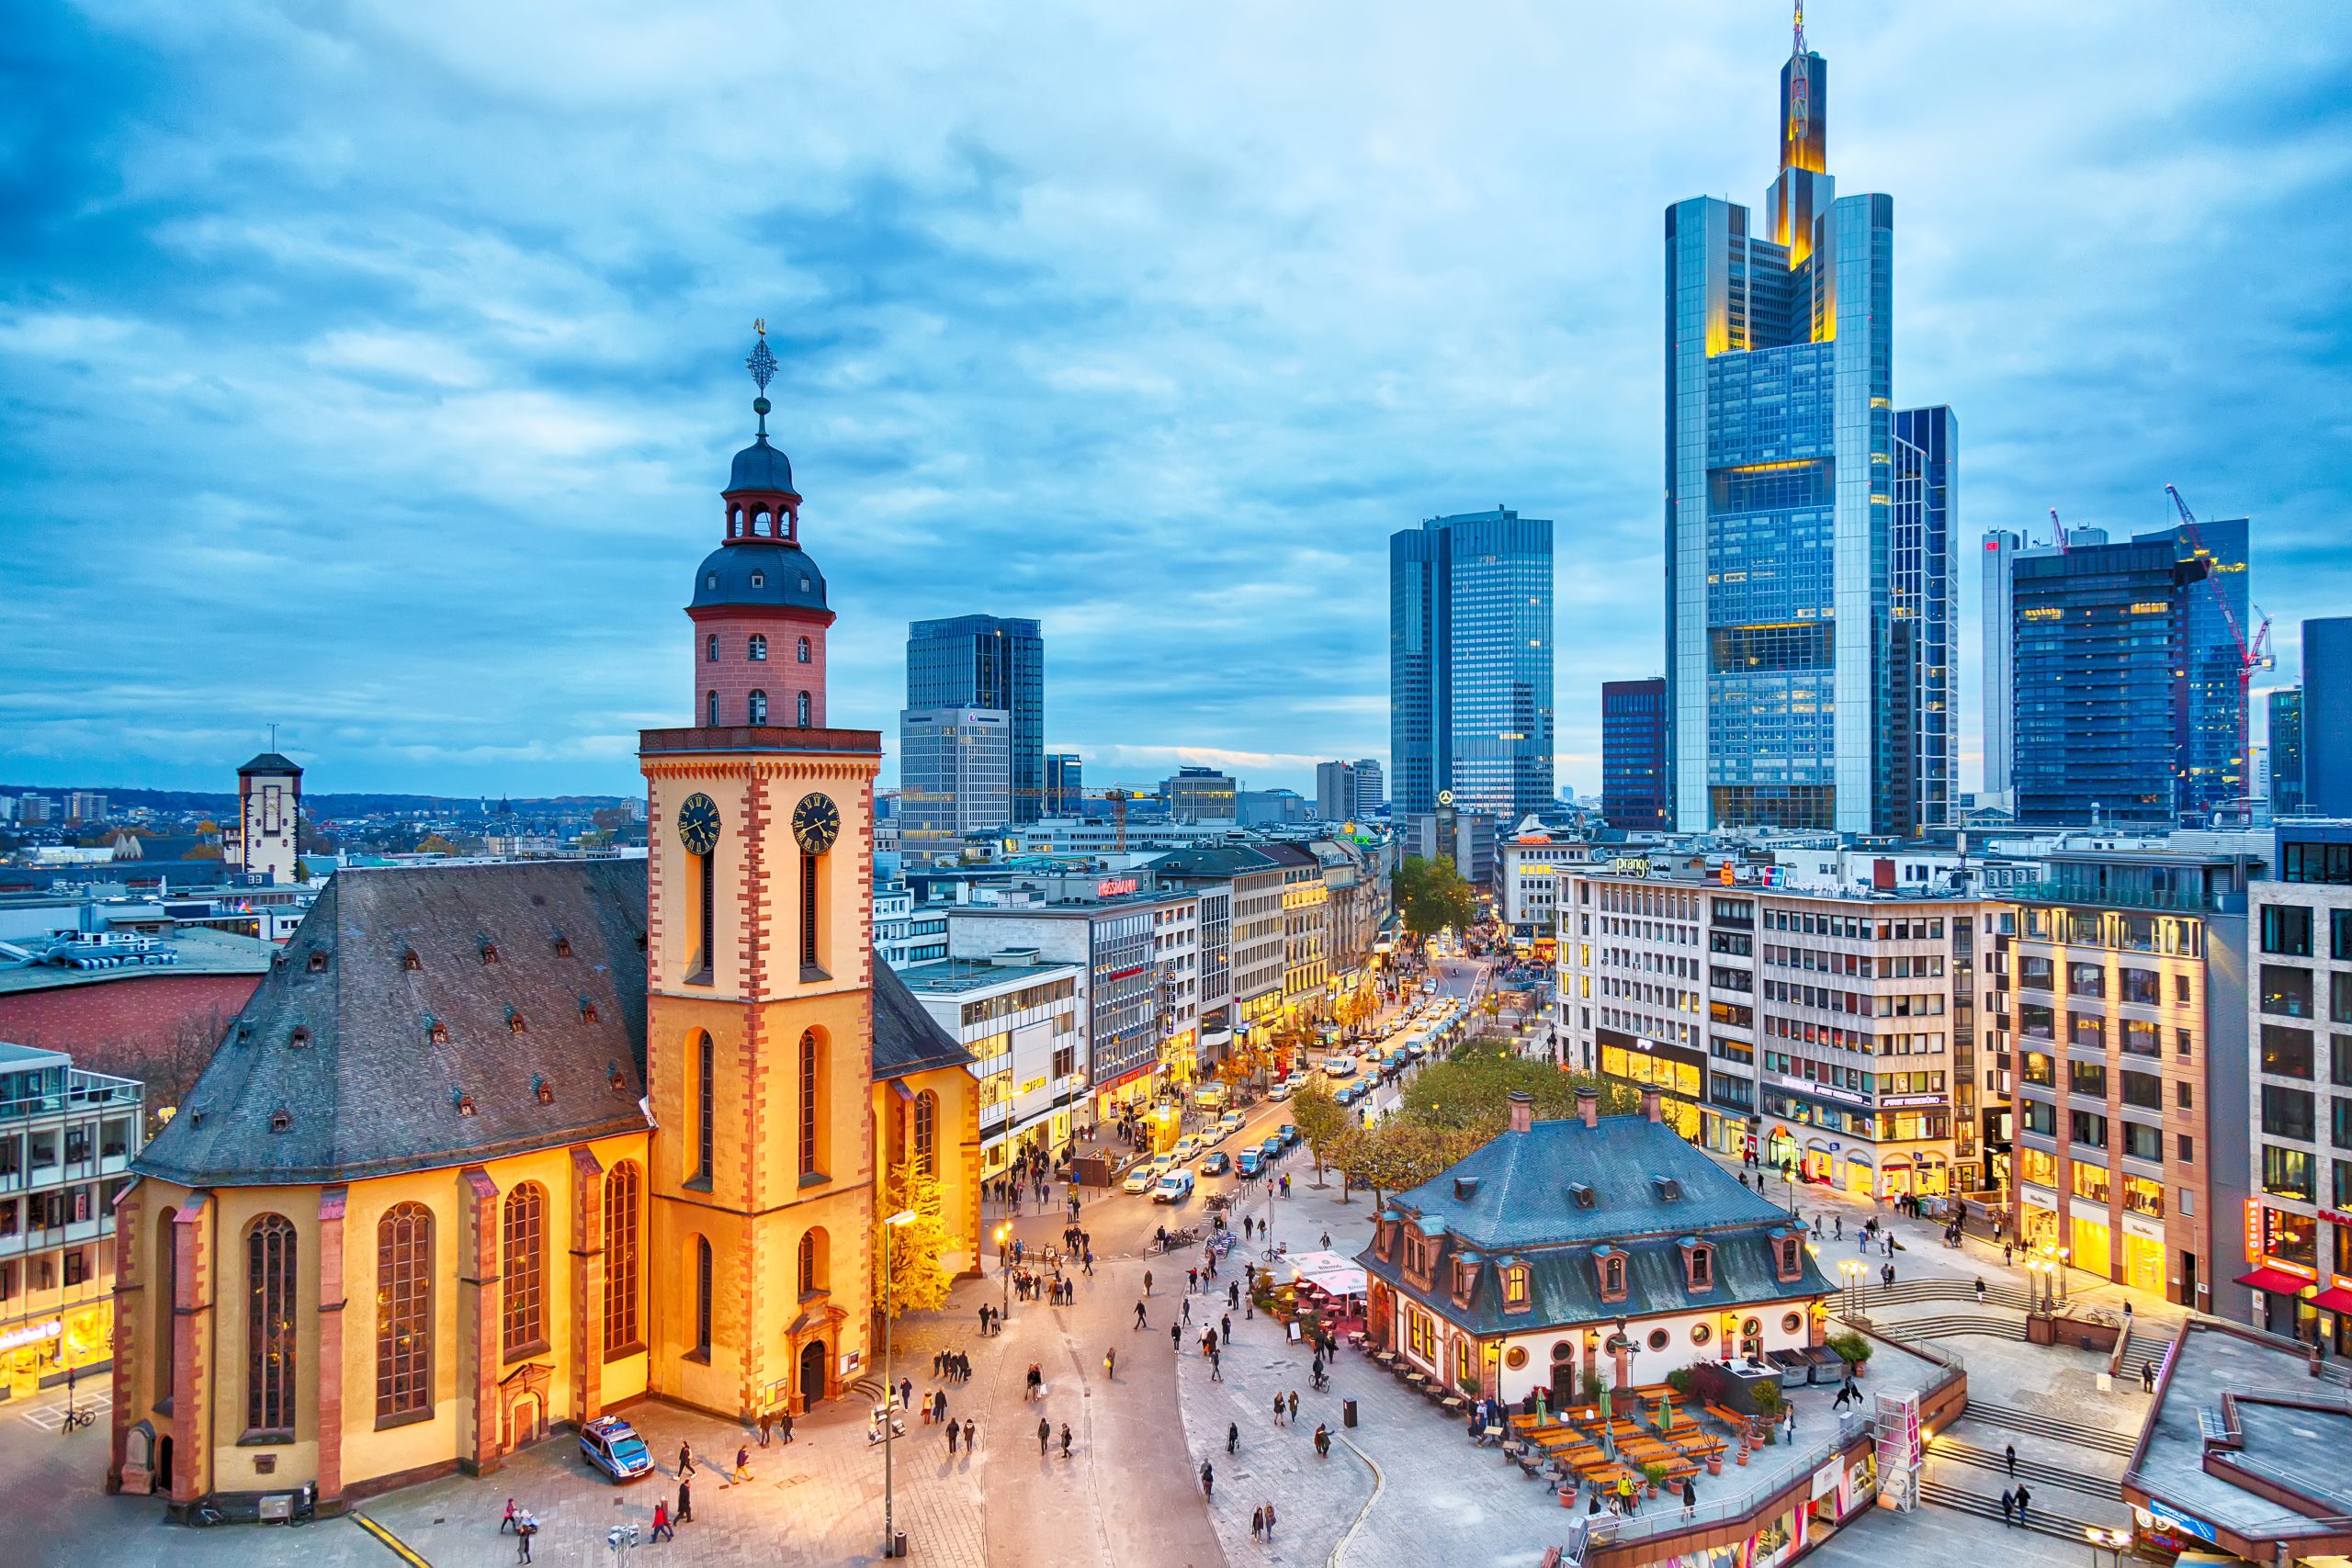 FRANKFURT, GERMANY - NOVEMBER, 2017: View to skyline of Frankfurt in sunset blue hour. St Paul's Church and the Hauptwache Main Guard building at Frankfurt central street Zeil